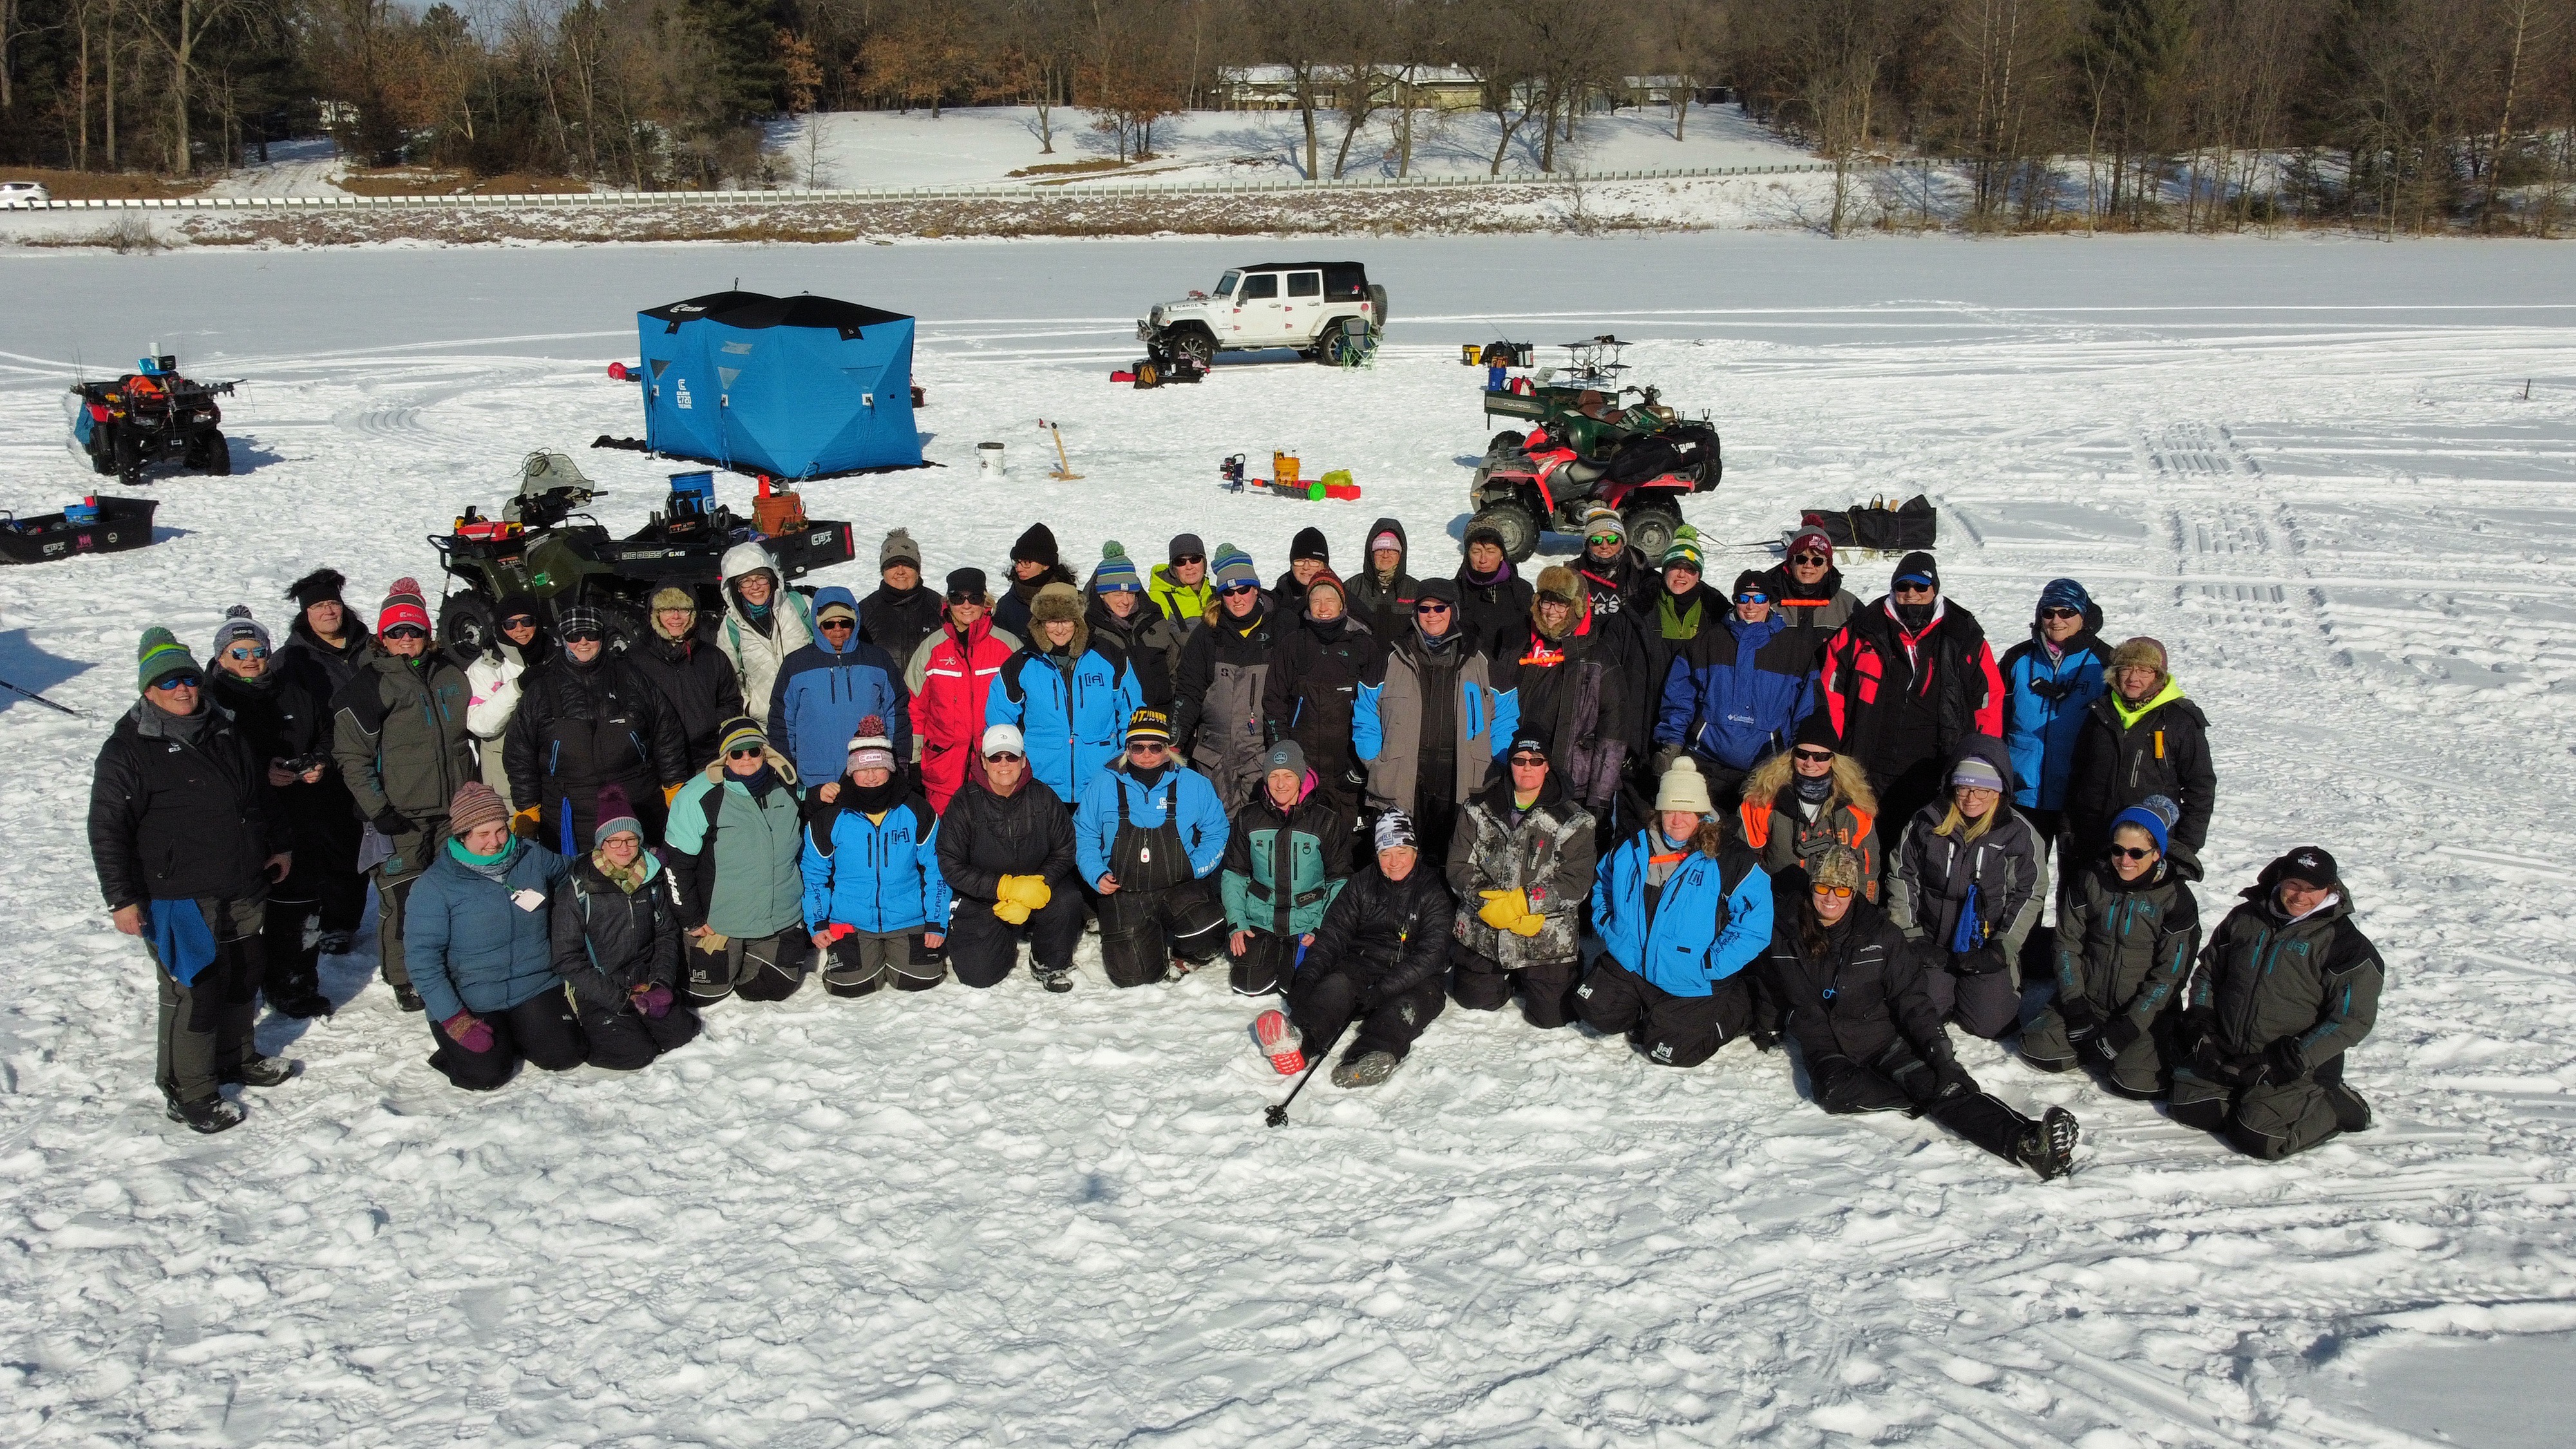 Barb Carey Introduces Women To Ice Fishing - Wisconsin Life